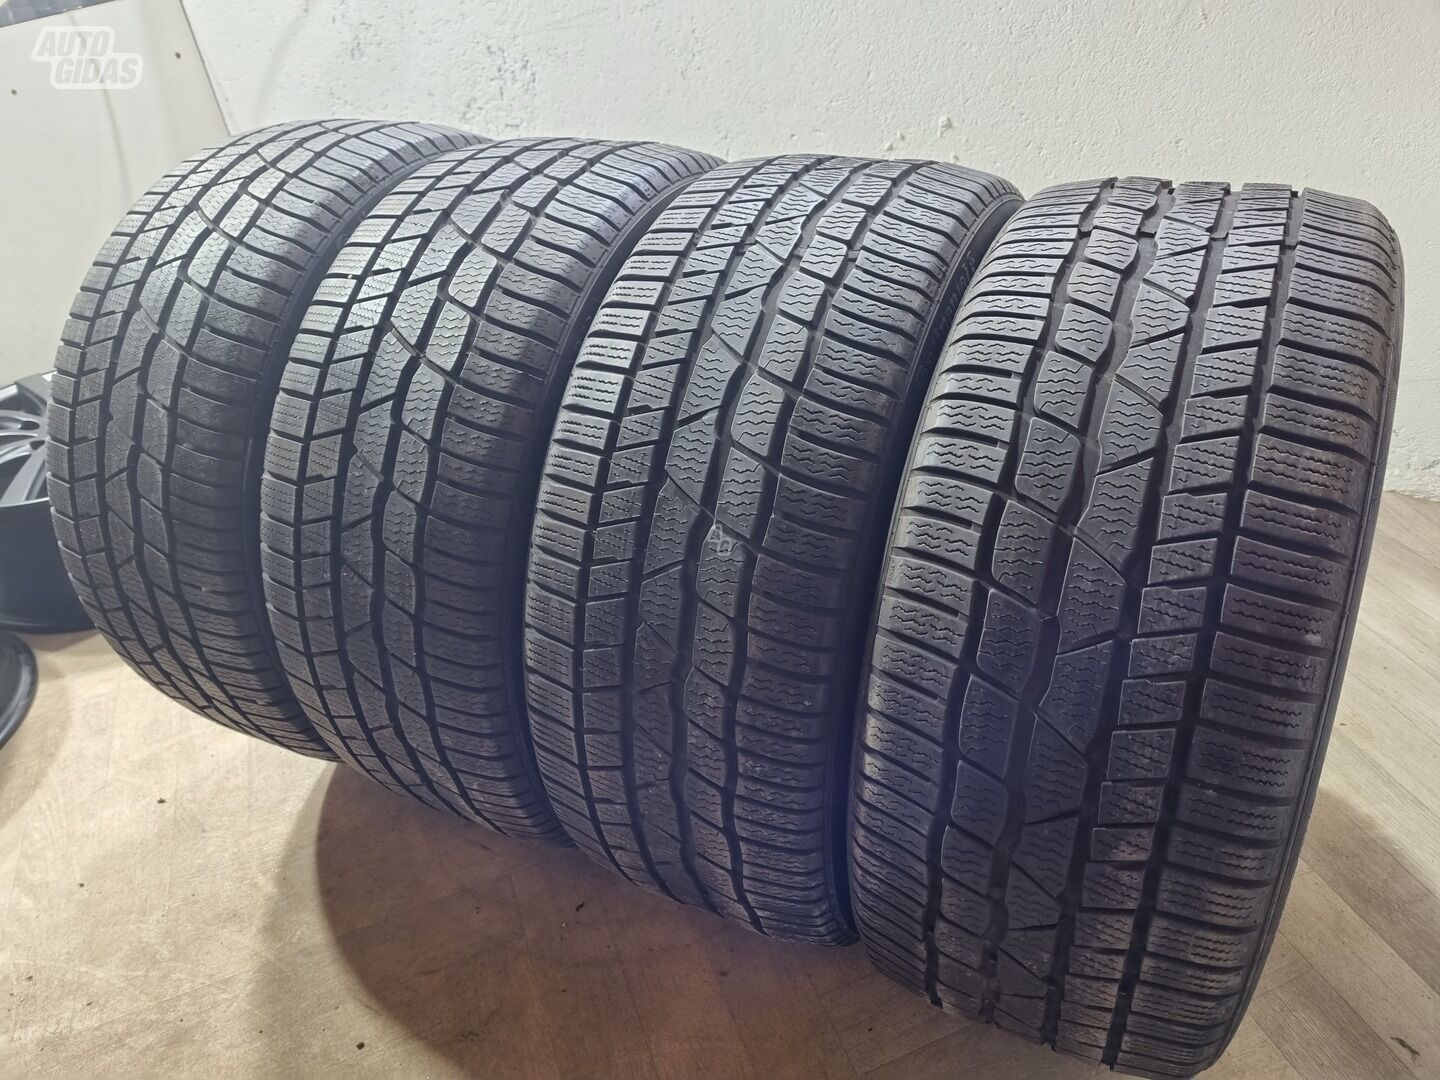 Continental 6-7mm, 2019m R18 universal tyres passanger car